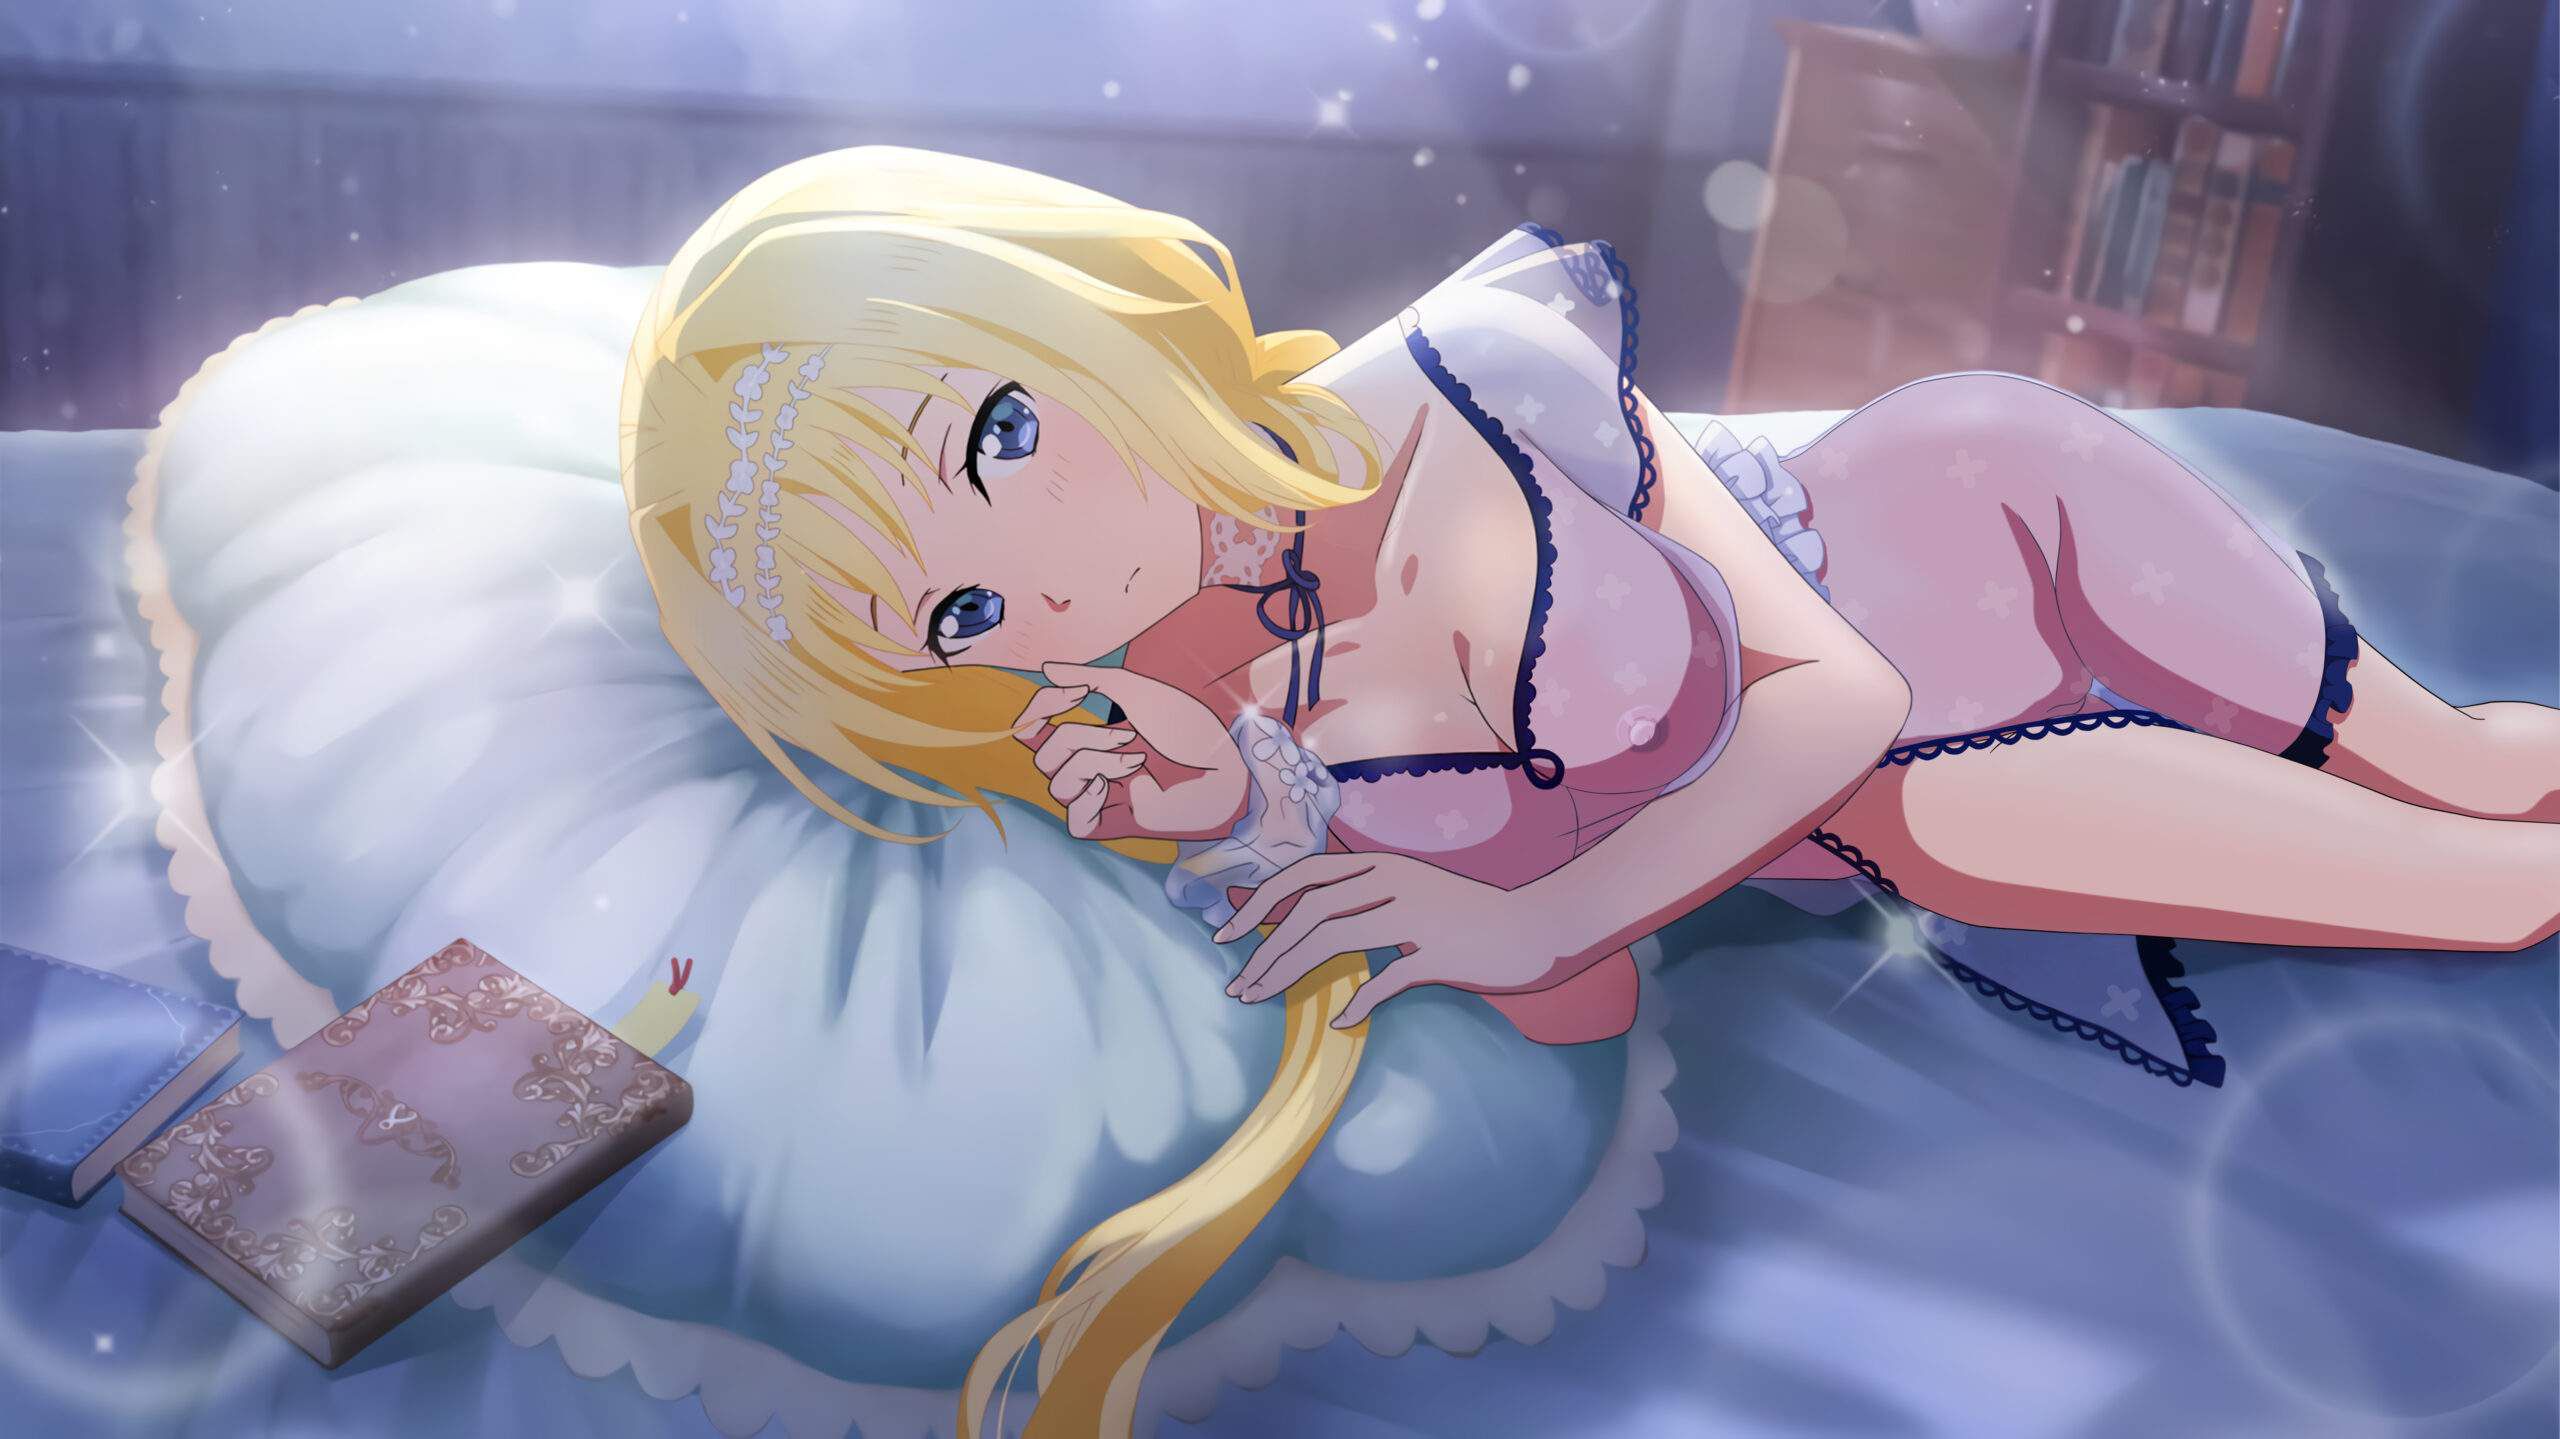 [Sword Art Online (SAO)] Erotic images such as Asuna-chan 74th 2